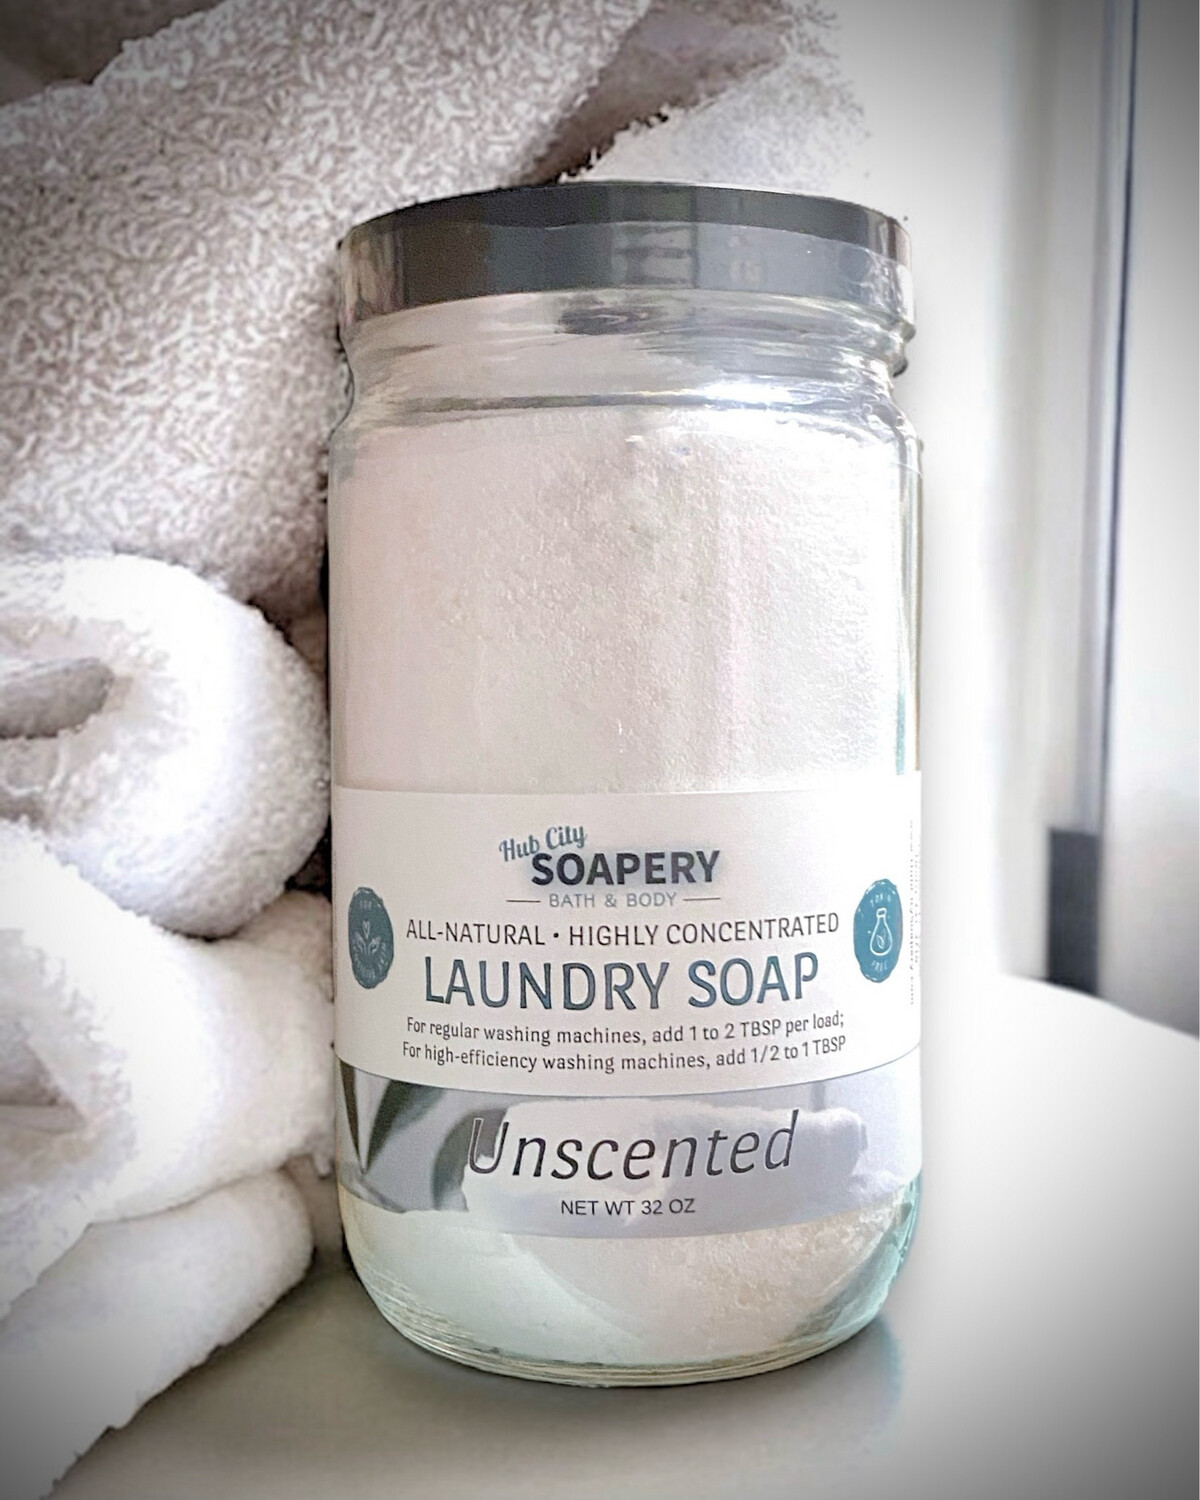 All-Natural Laundry Soap - Unscented